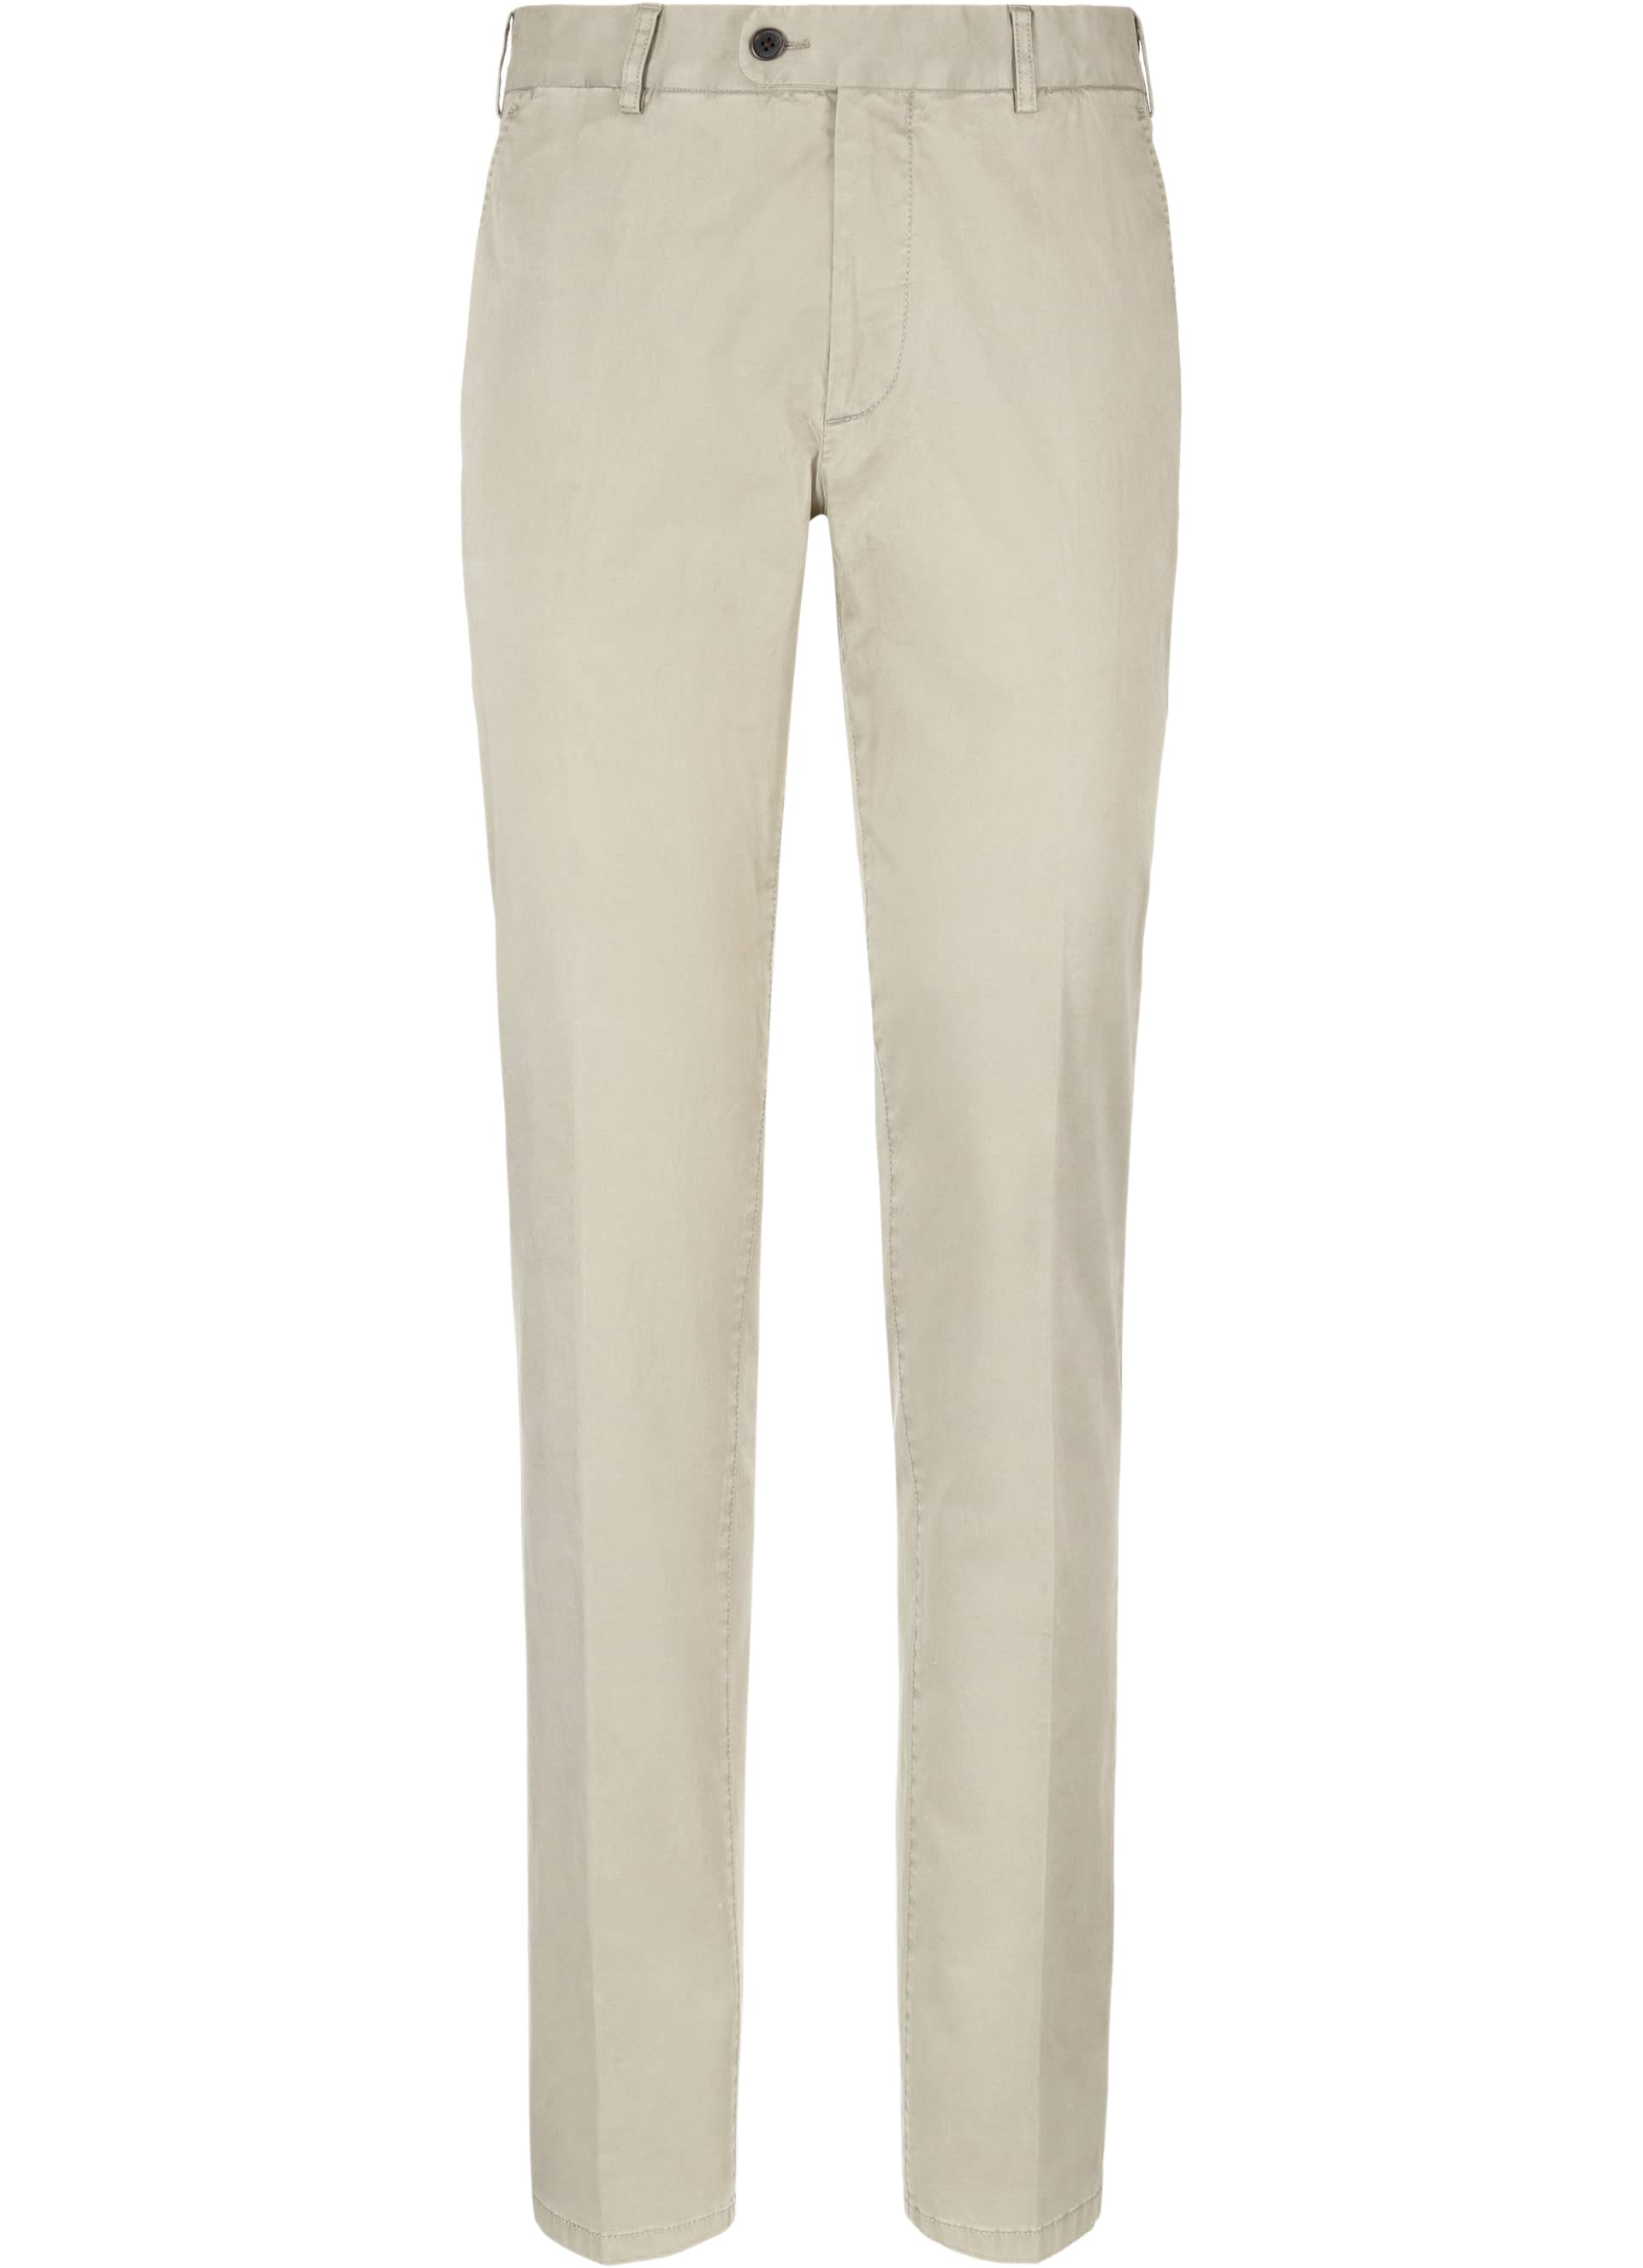 Sand Trousers B902i | Suitsupply Online Store